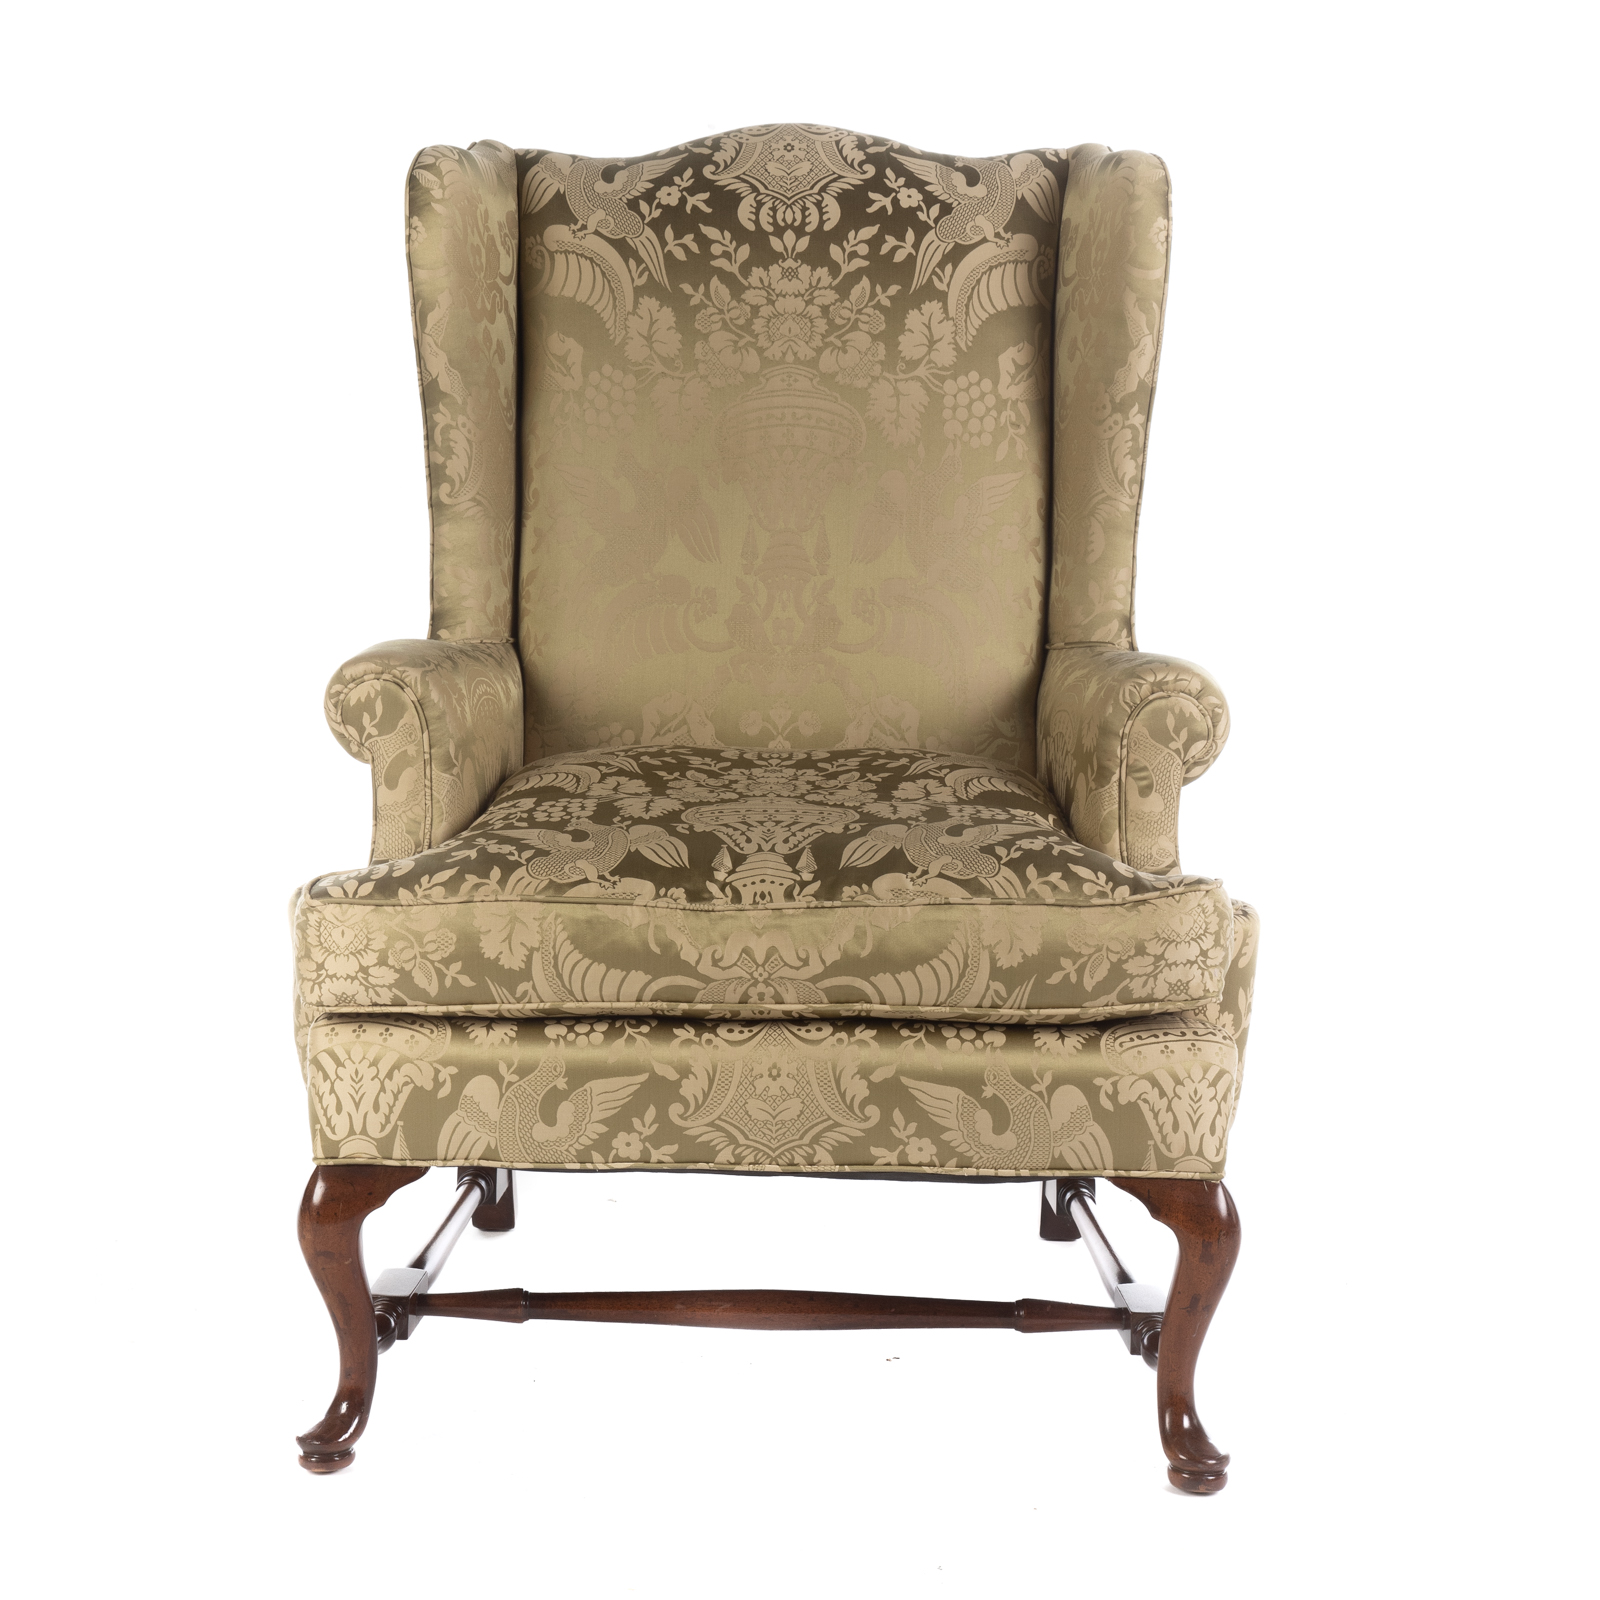 QUEEN ANNE STYLE UPHOLSTERED WING 29dda9